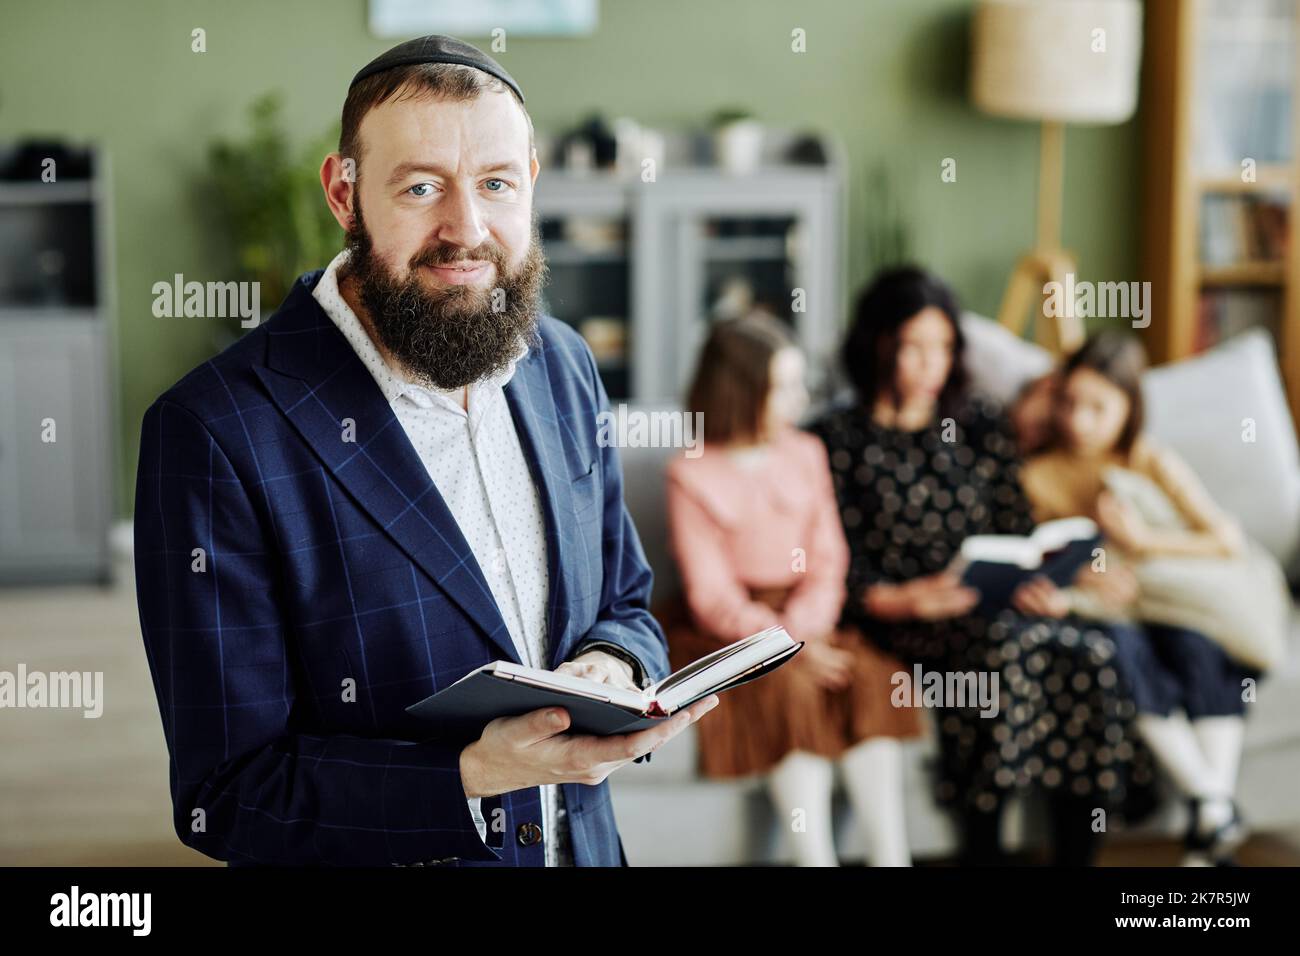 Waist up portrait of bearded jewish man wearing kippah and looking at camera holding book, copy space Stock Photo